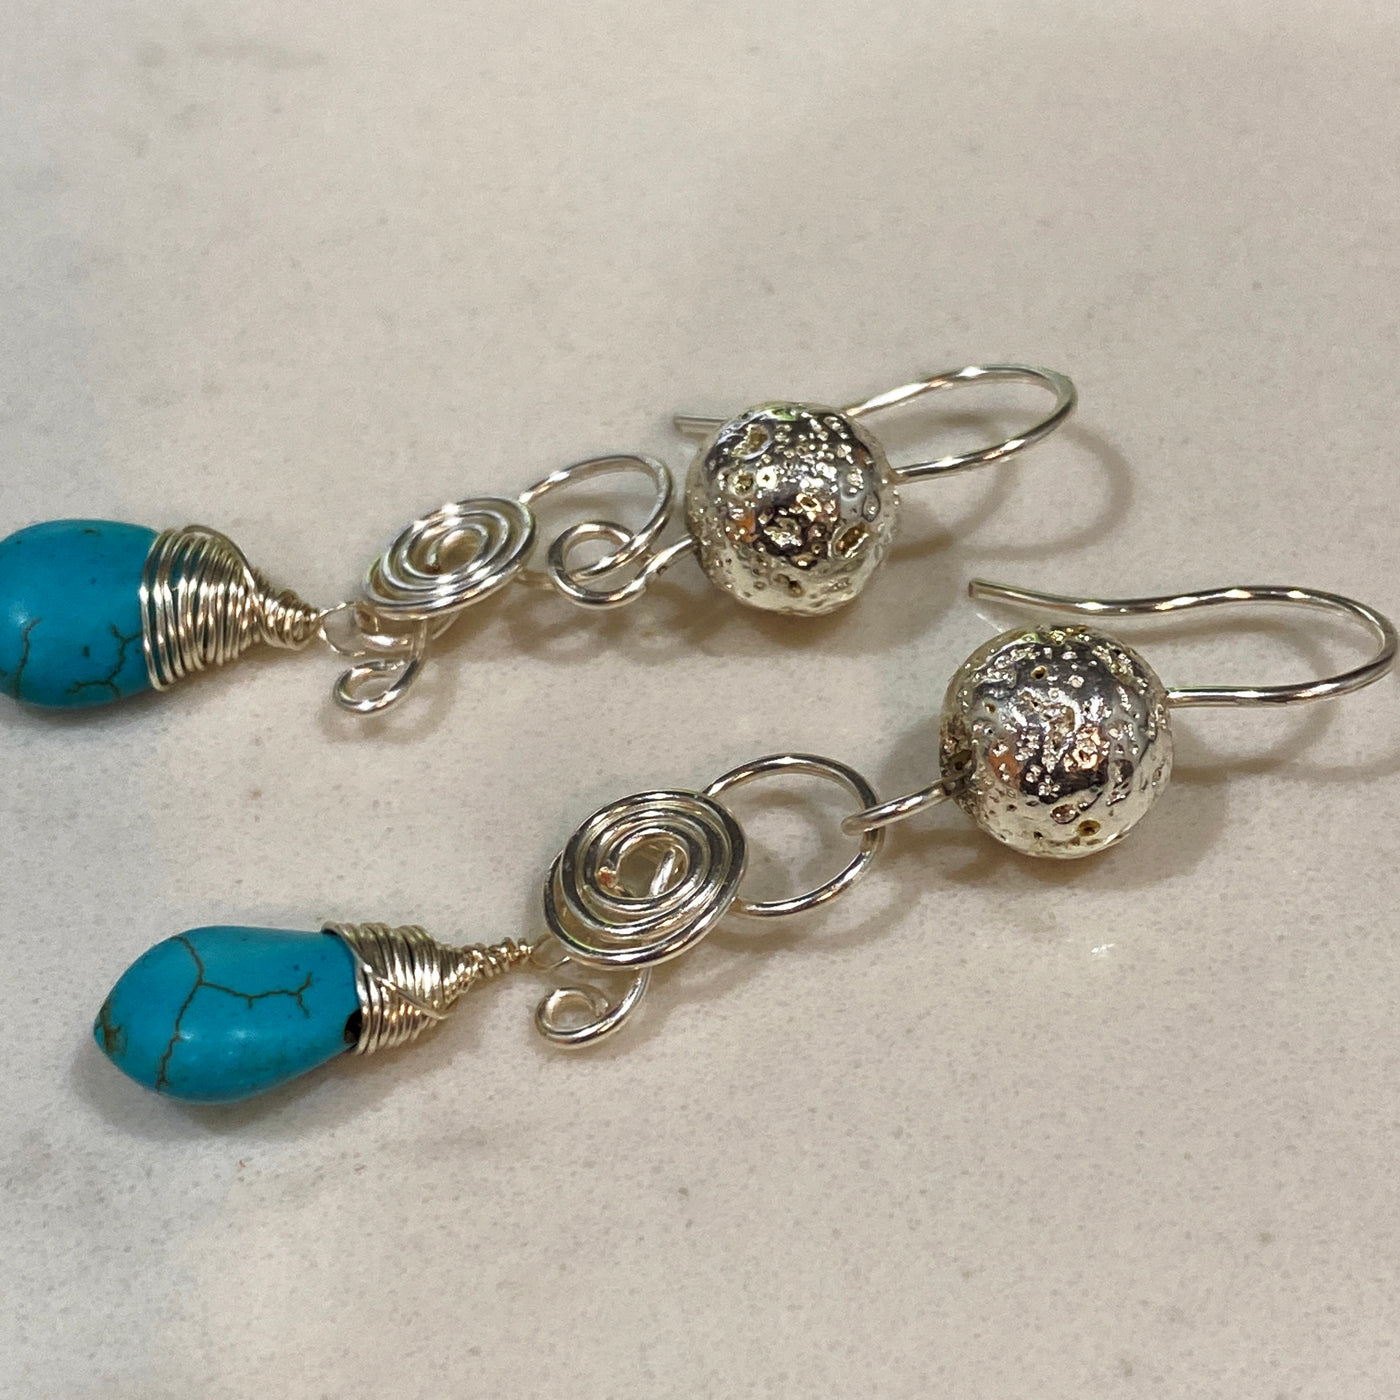 Lavastones silverplated and silver wrapped blue holwlite briolette earrings